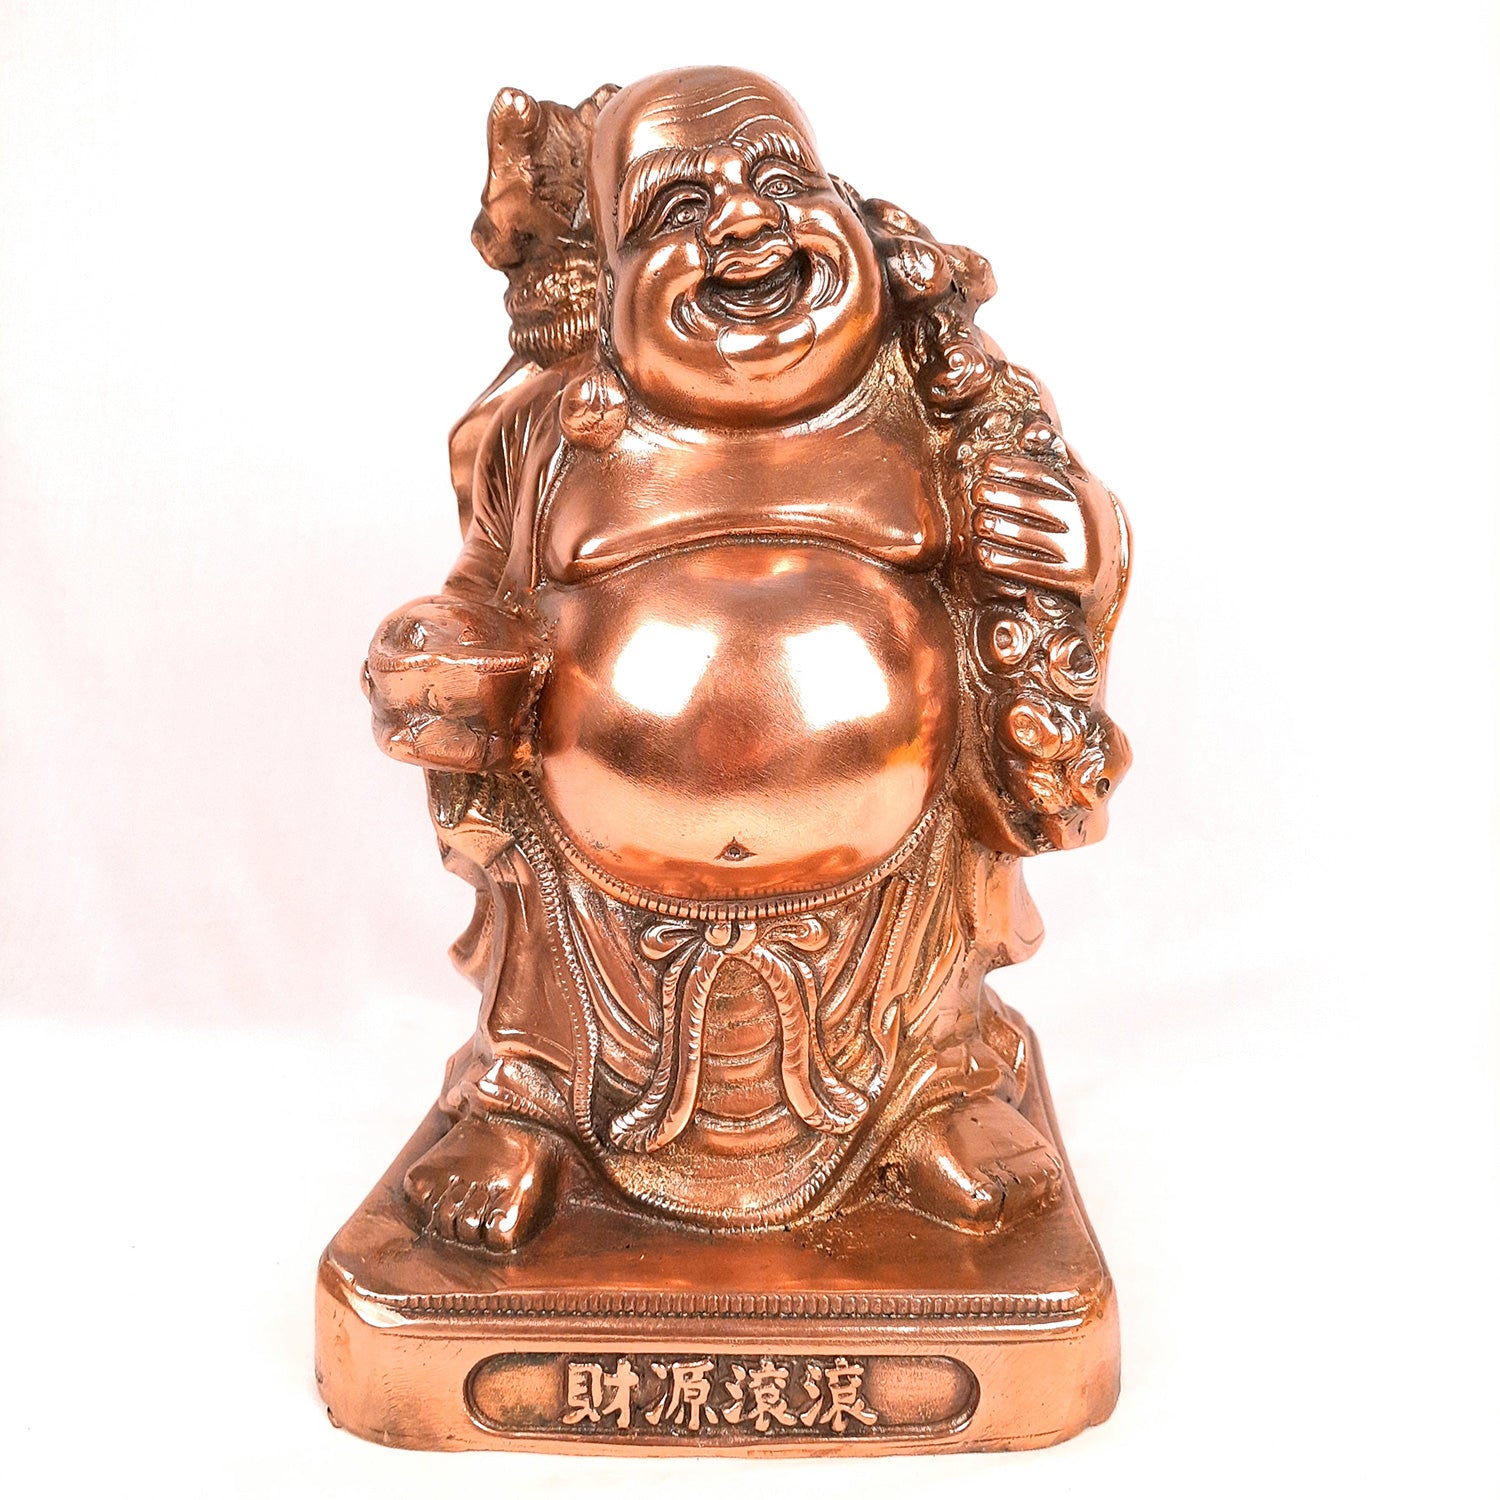 Laughing Buddha Statue | Child Monk Showpiece with Money Bag for Wealth | For Good Luck, Home, Table & Office Decor & Gift - 13 Inch - Apkamart